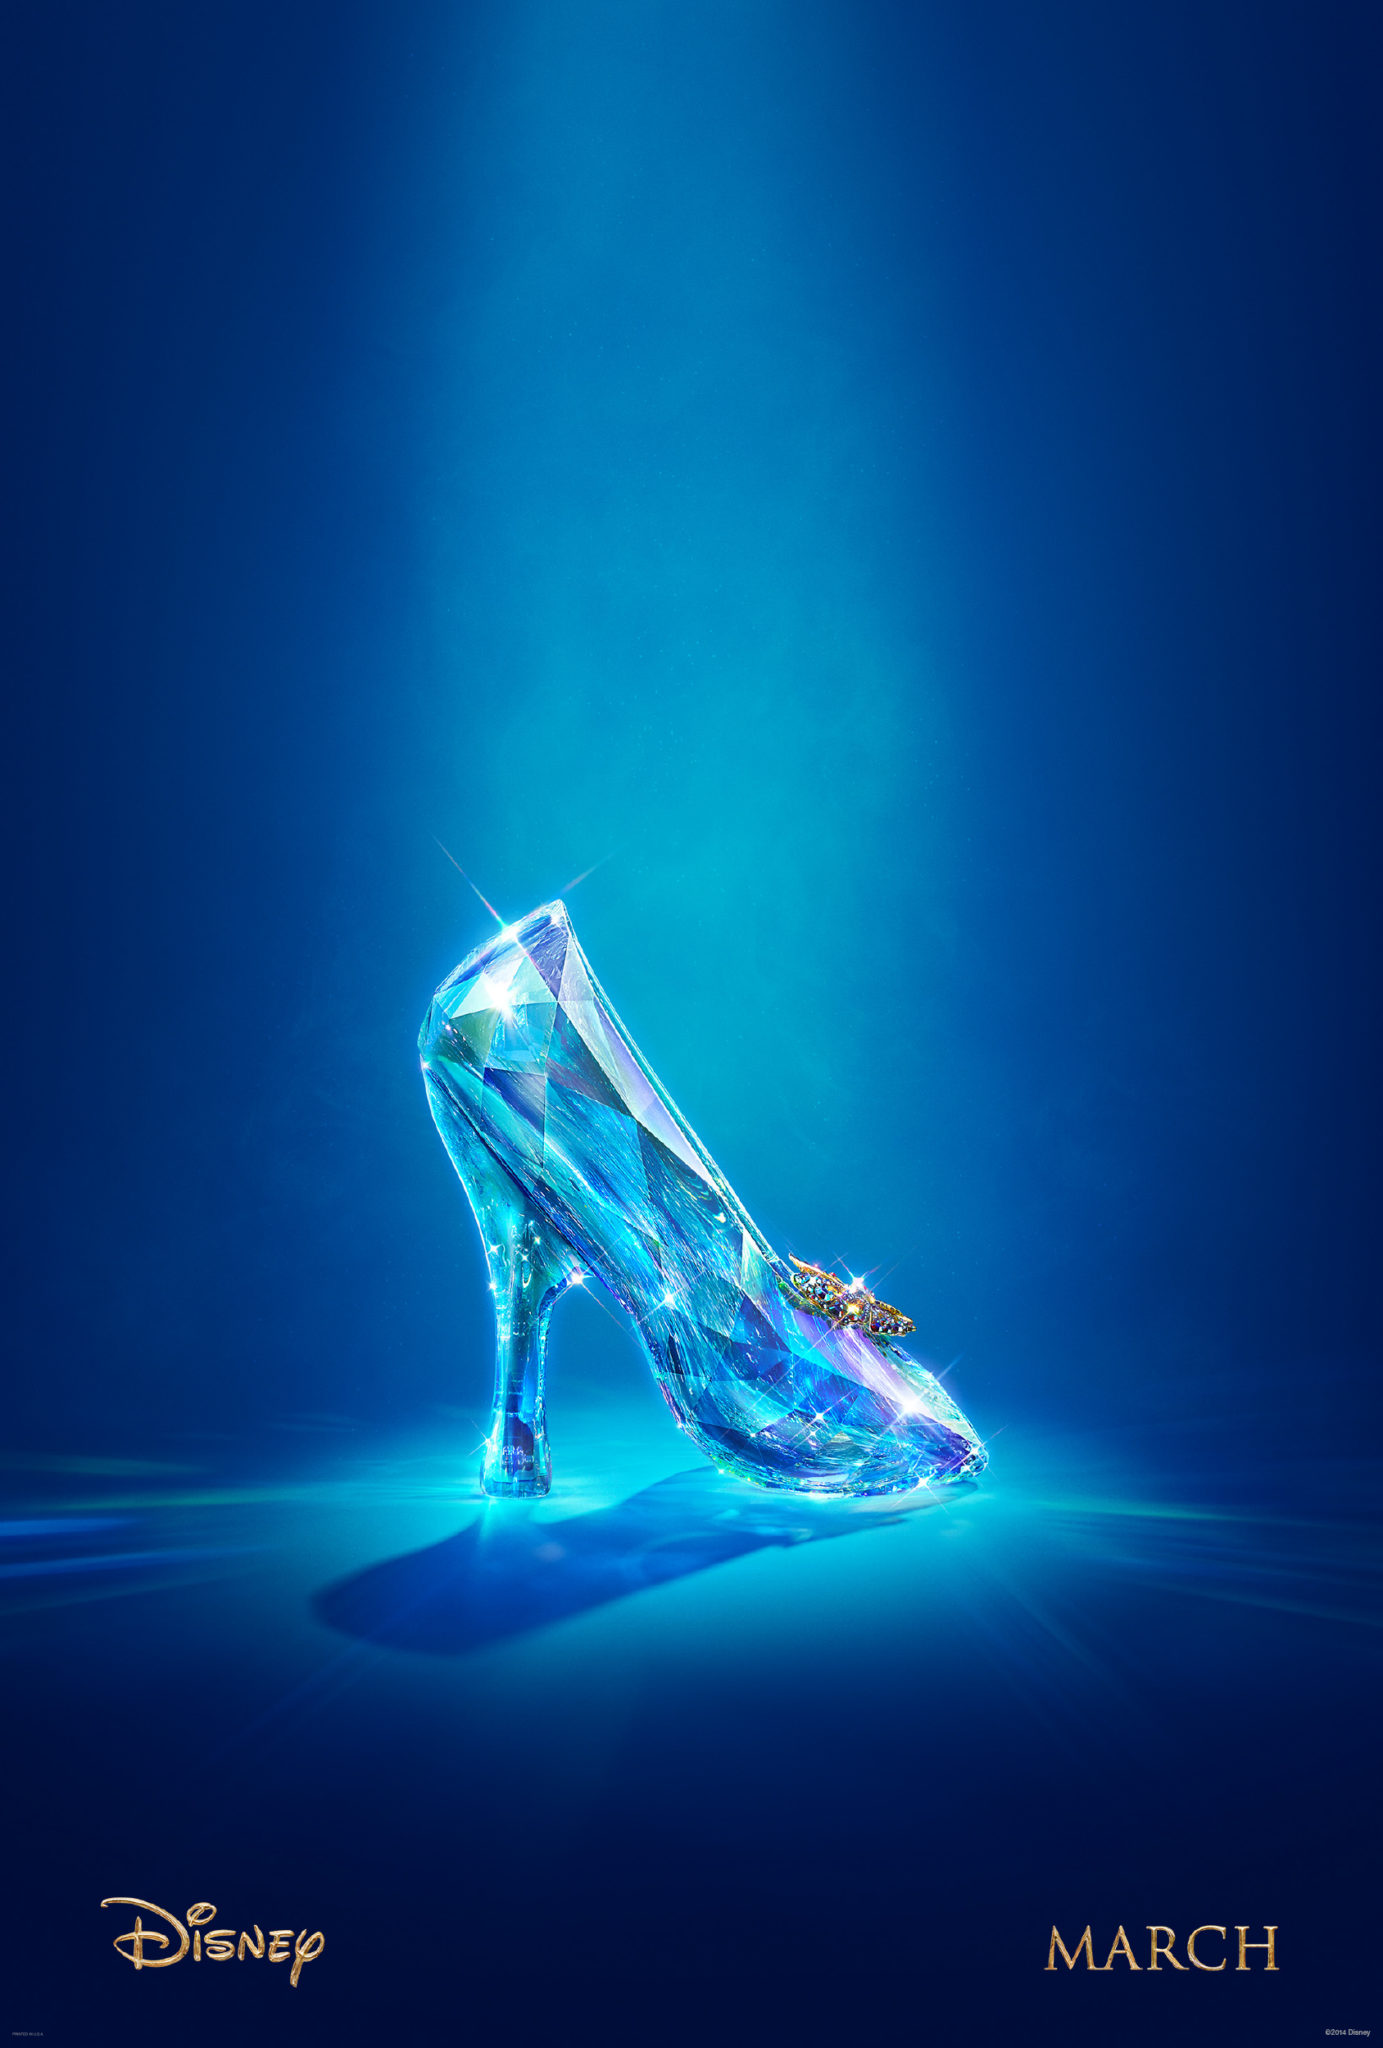 First 'Cinderella' & Teaser Trailer Showcases the Sparkly Glass | Rotoscopers